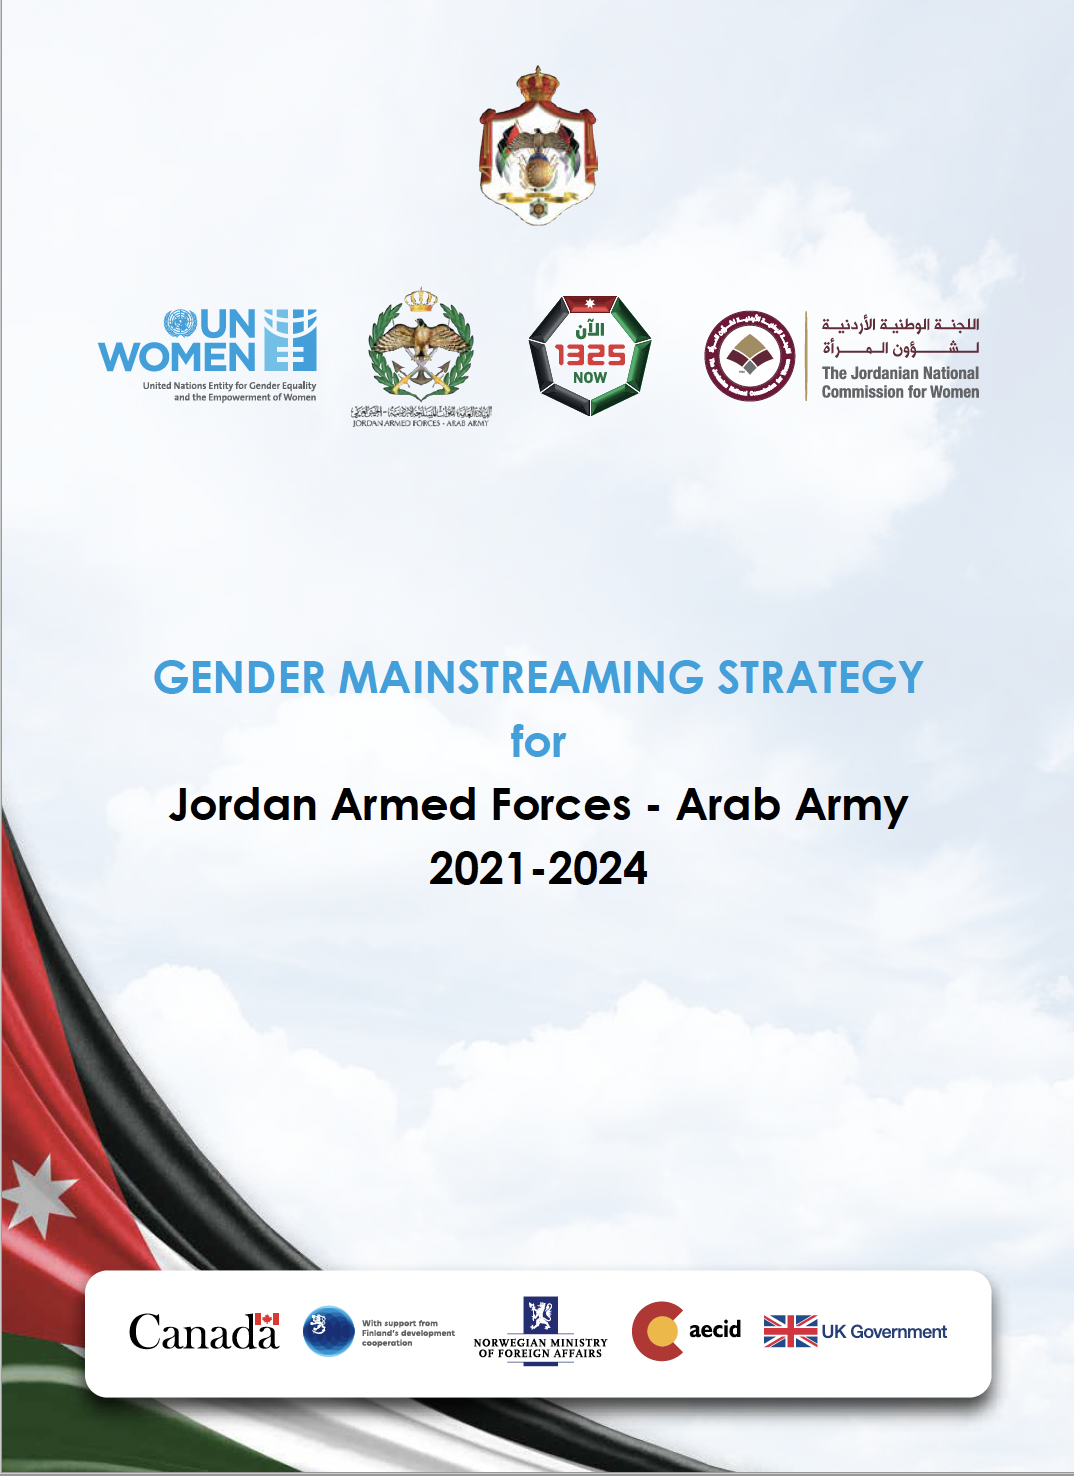 Gender Mainstreaming Strategy for Jordan Armed Forces - Arab Army 2021-2024